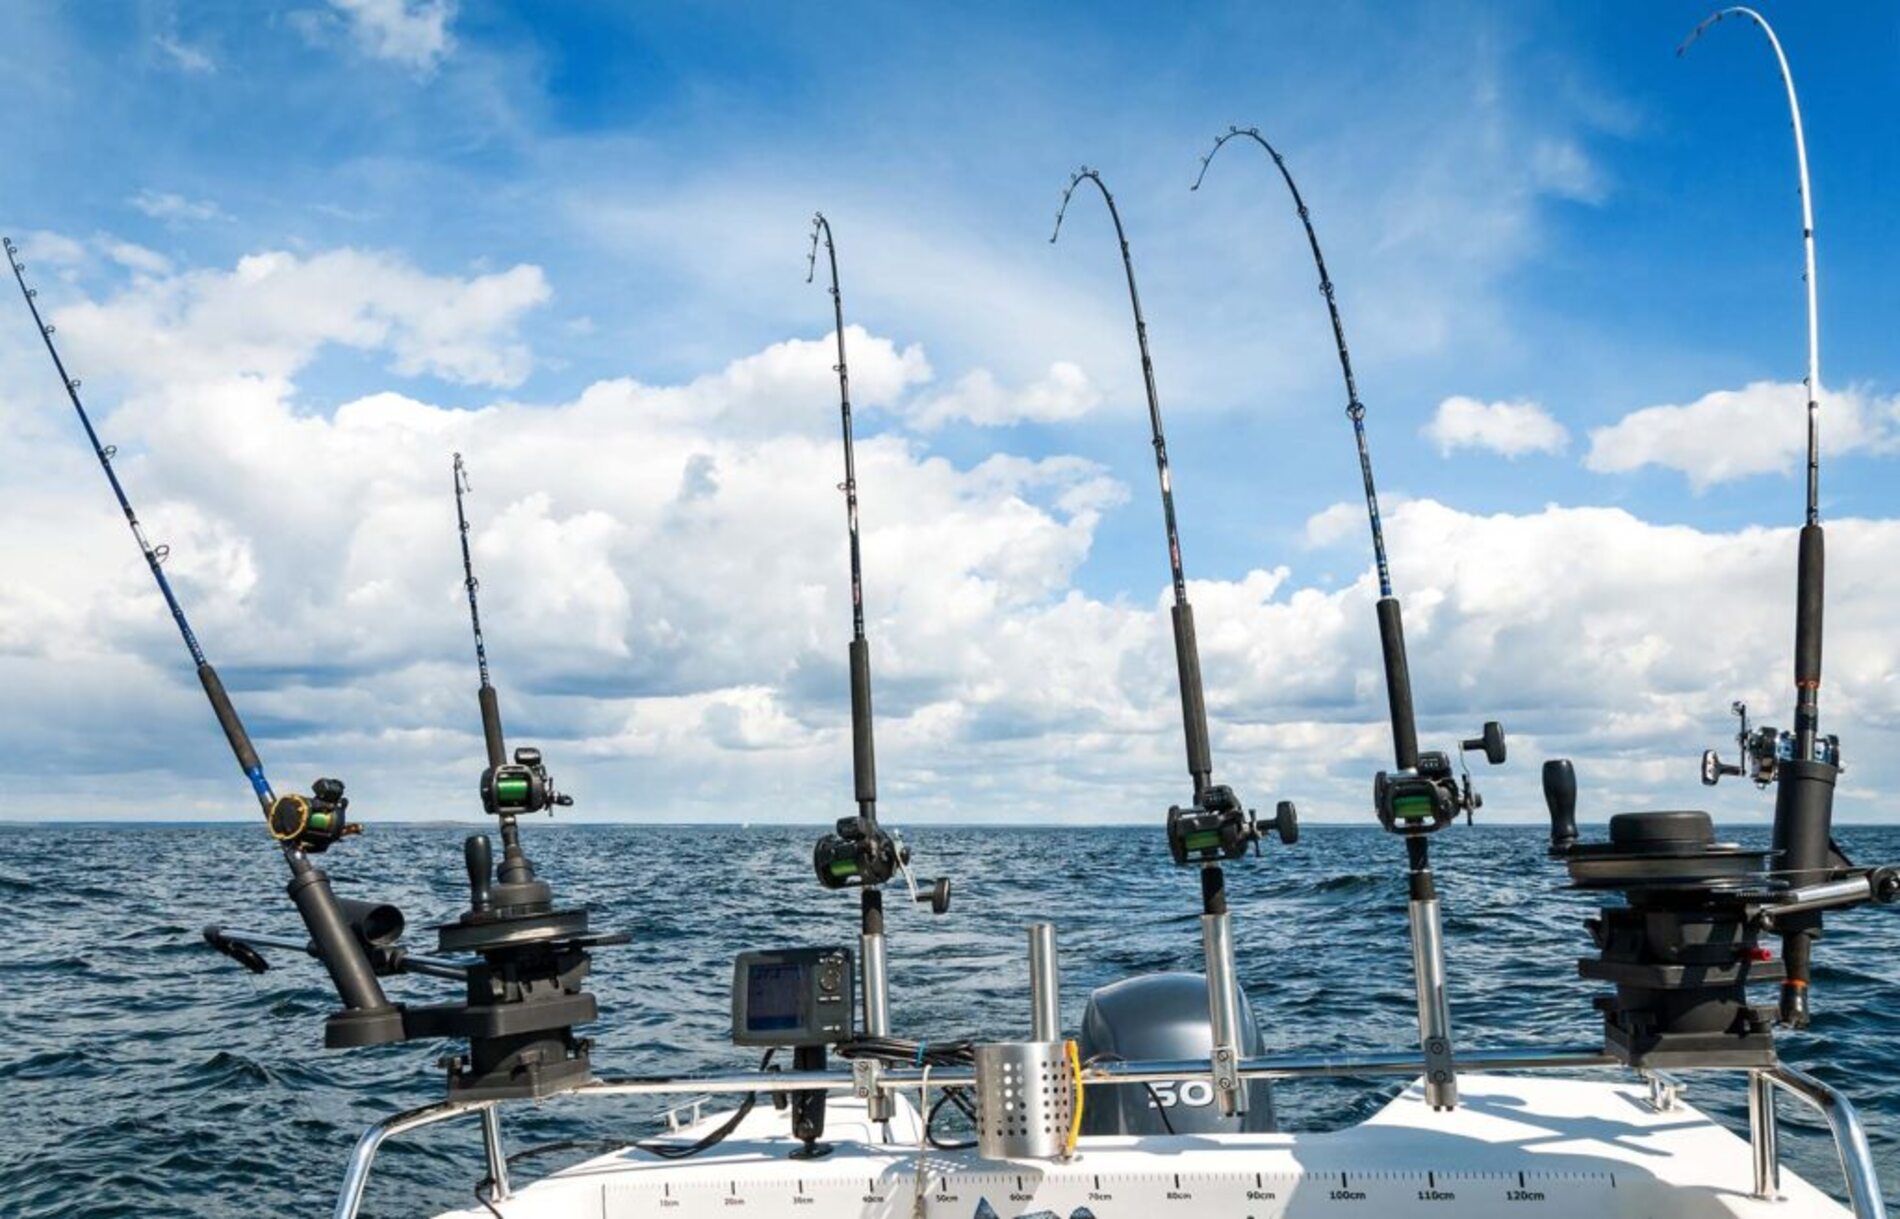 Fishing rods on the back of a boat used for trolling on the sea